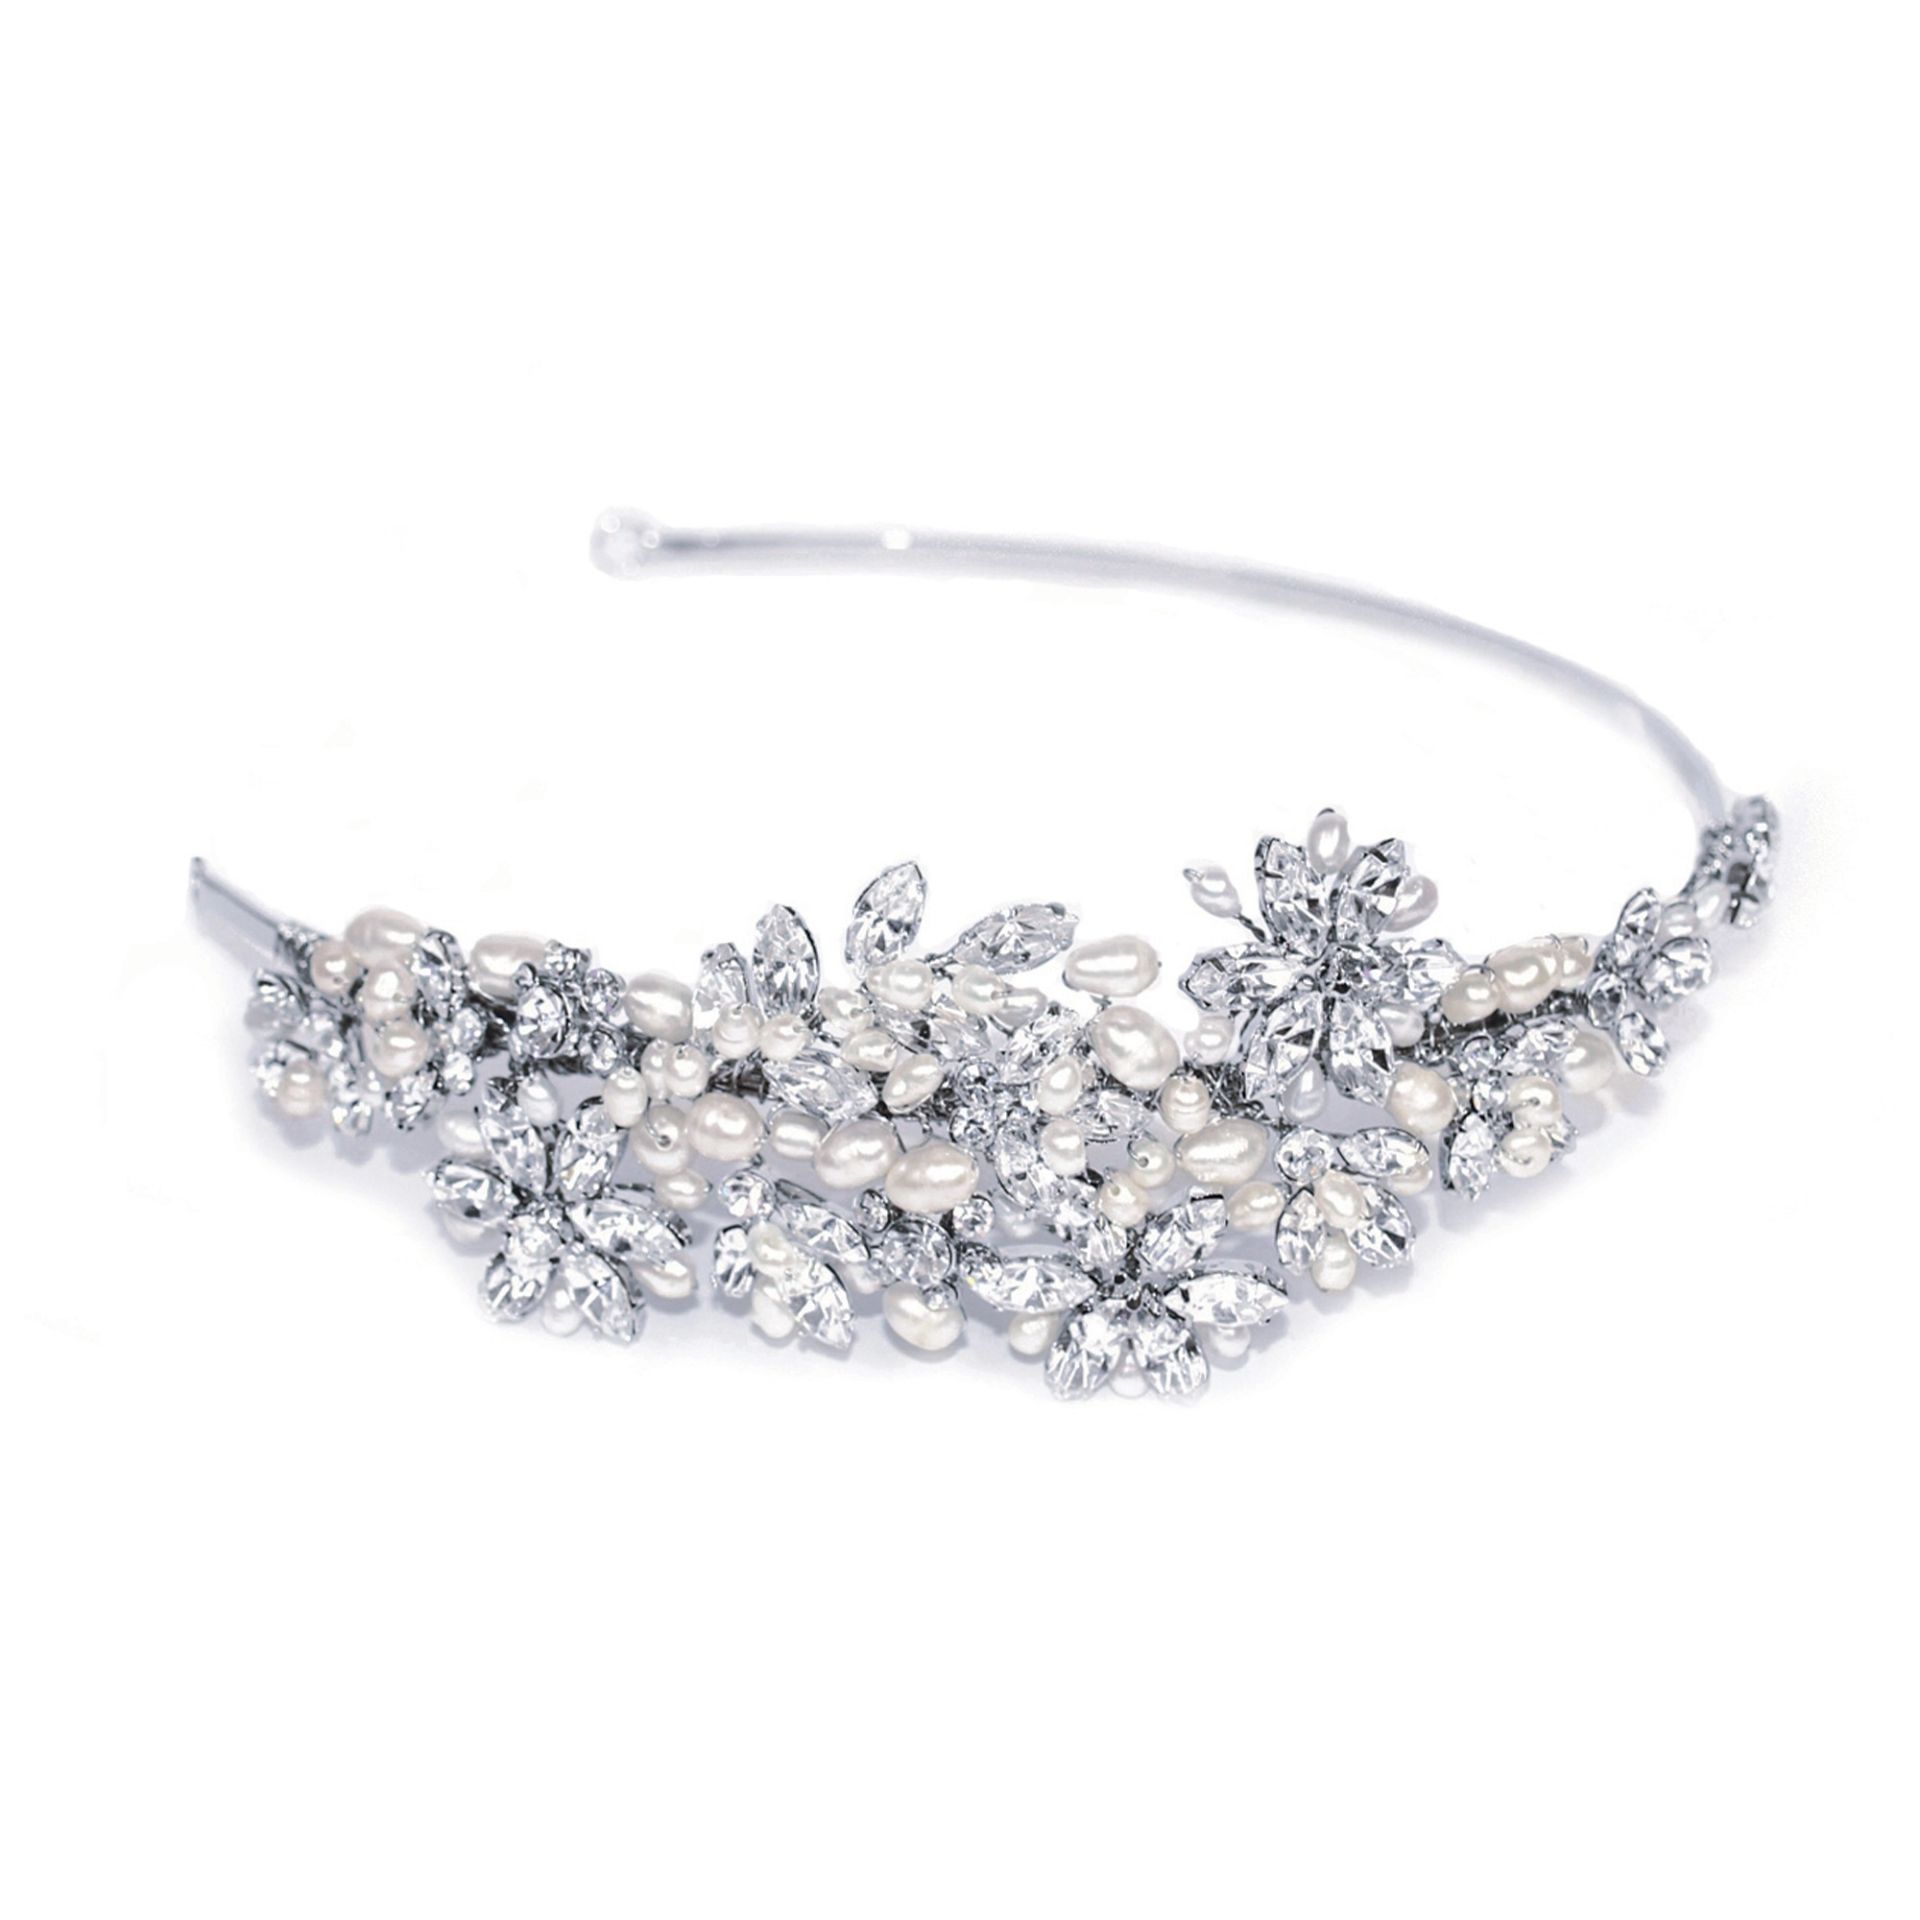 1 x Ivory & Co 'DIOR' Bridal Headpiece Wedding Tiara Featuring A Dazzling Rhodium Crystal And Pearl - Image 2 of 12